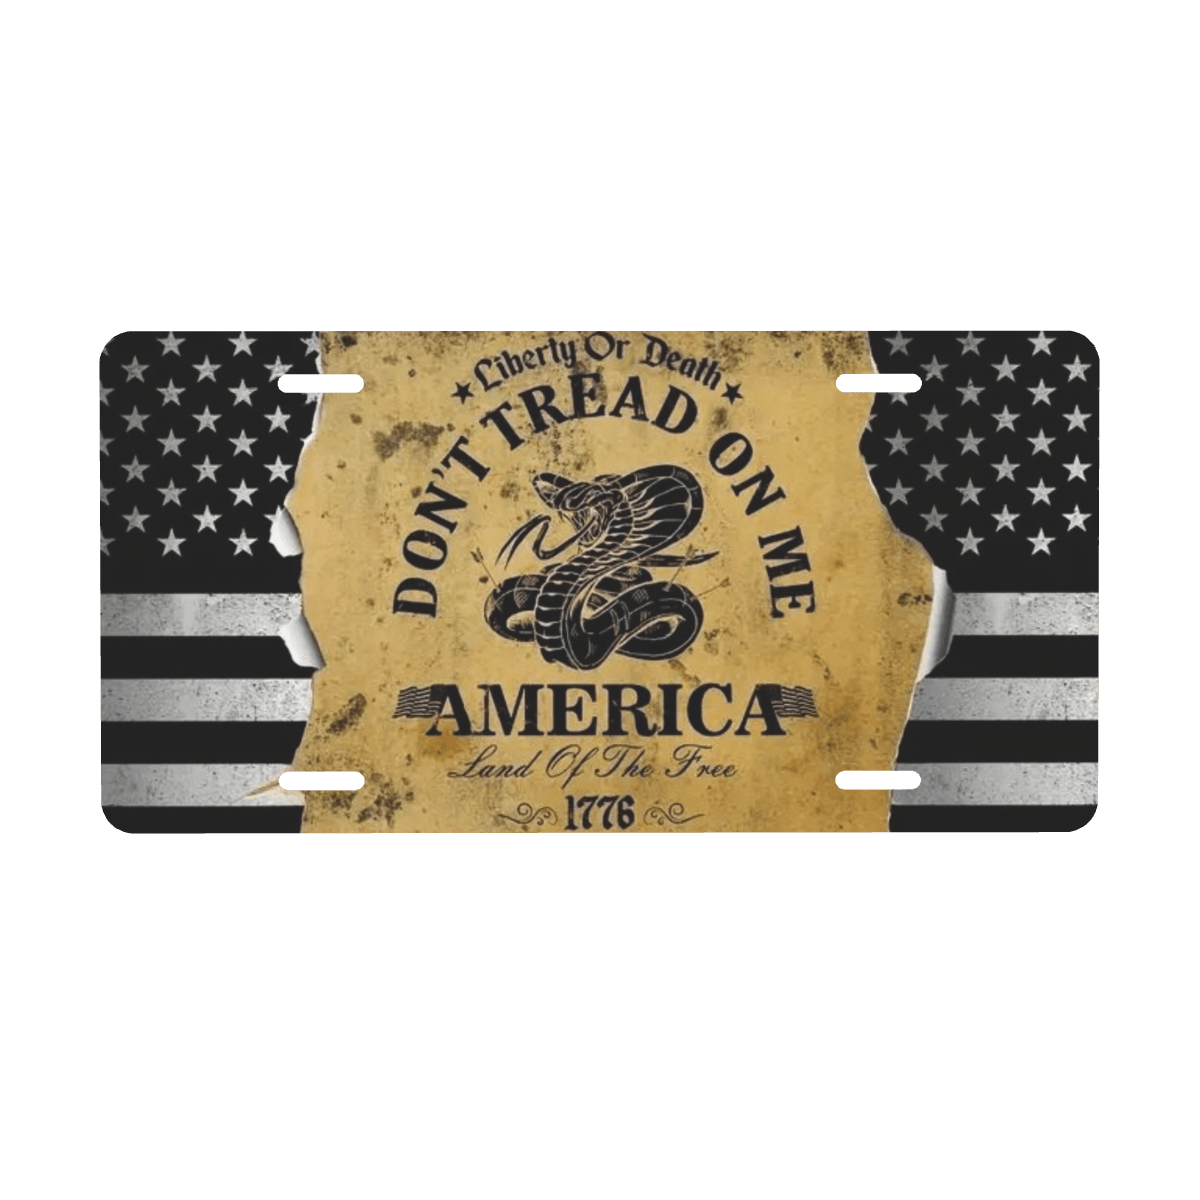  USA Fishing Flag License Plate Cover Aluminum Car Decorative  Front License Plate Covers Novelty Vanity Tag Rust-Proof License Plate  Protector 6x12 Inch : Automotive